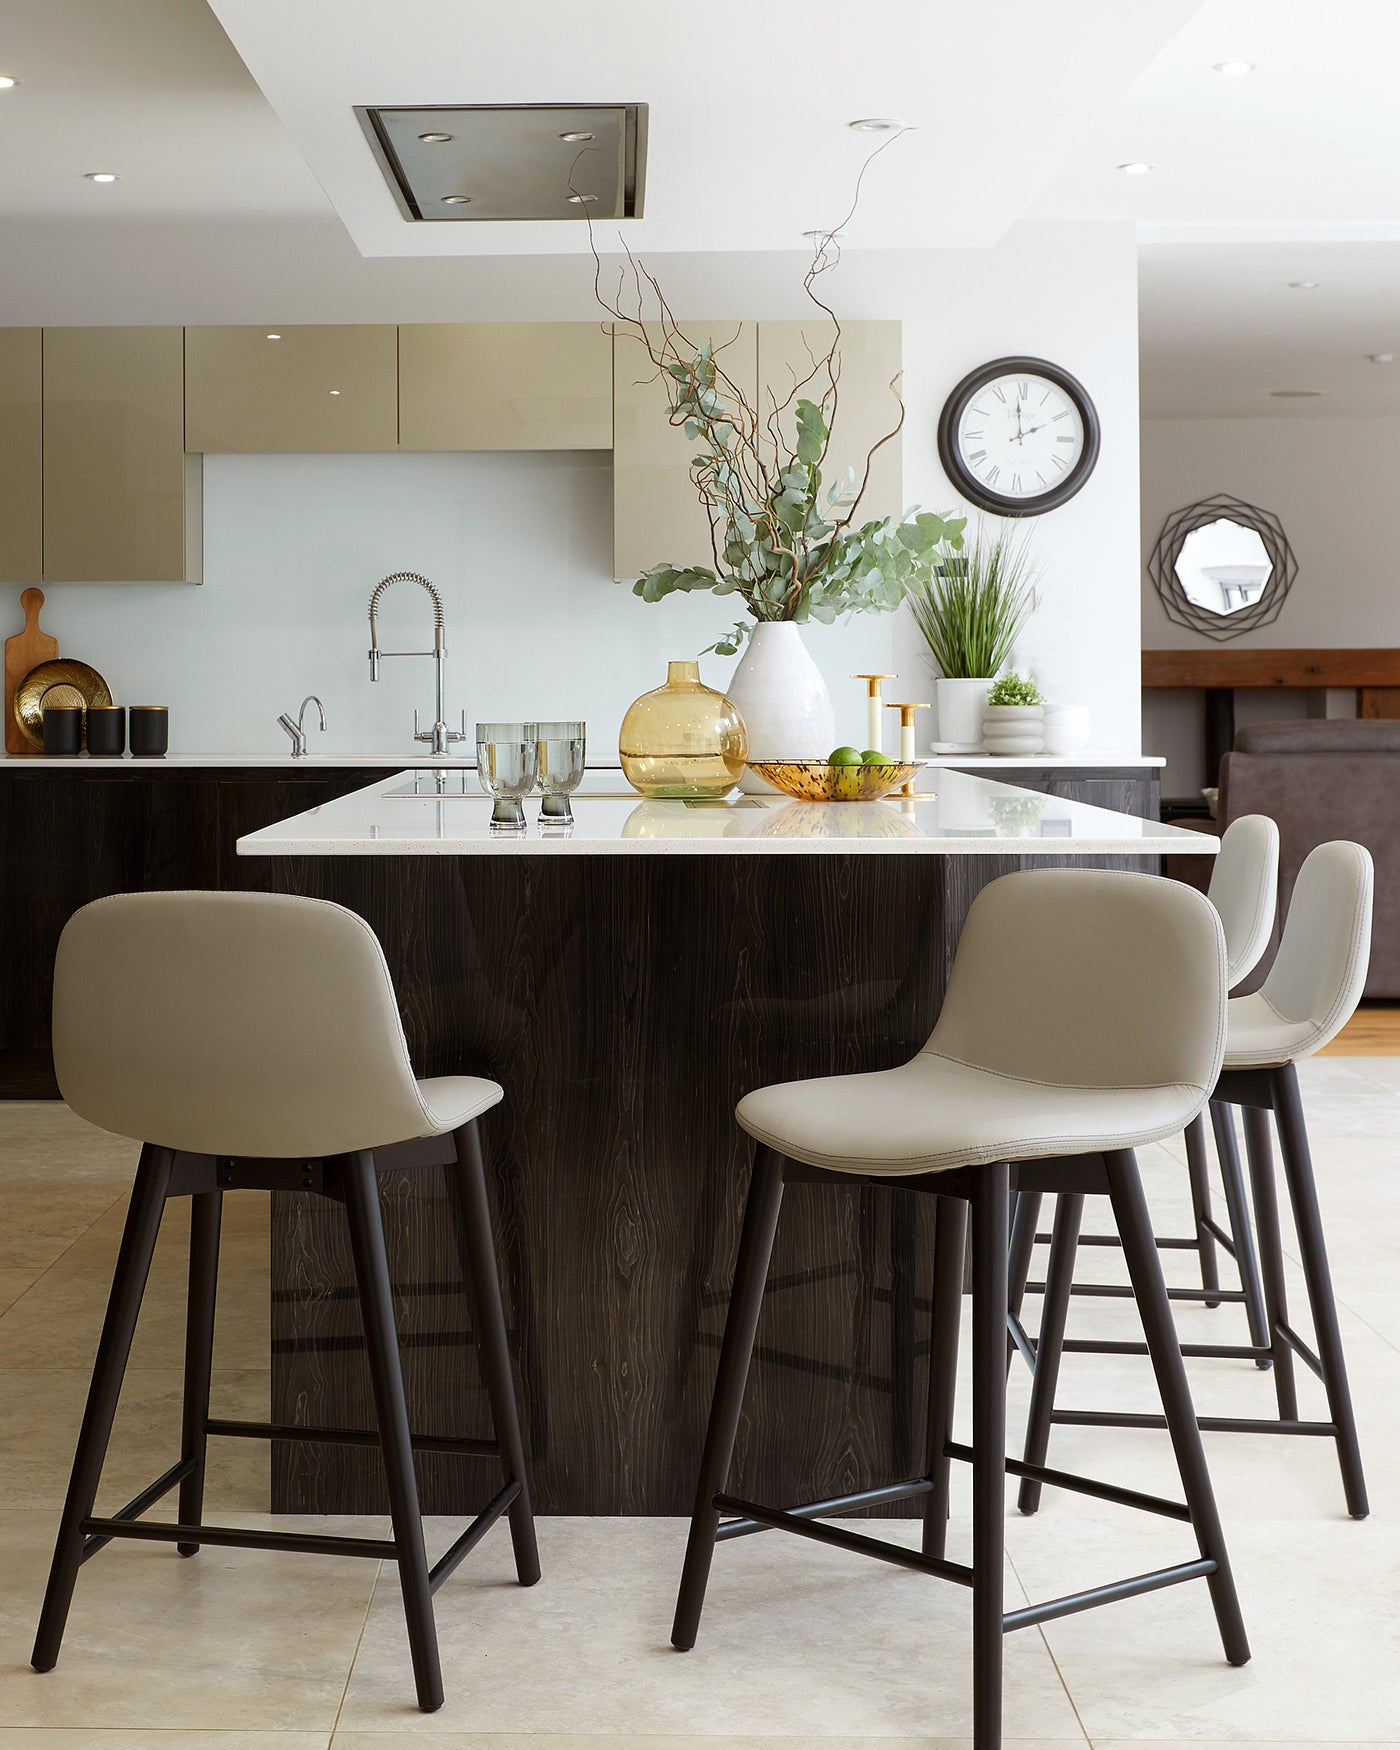 Modern kitchen with three stylish bar stools featuring dark wooden legs and comfortable, curved light grey seats, arranged at a kitchen island with a dark wood finish and white countertop.